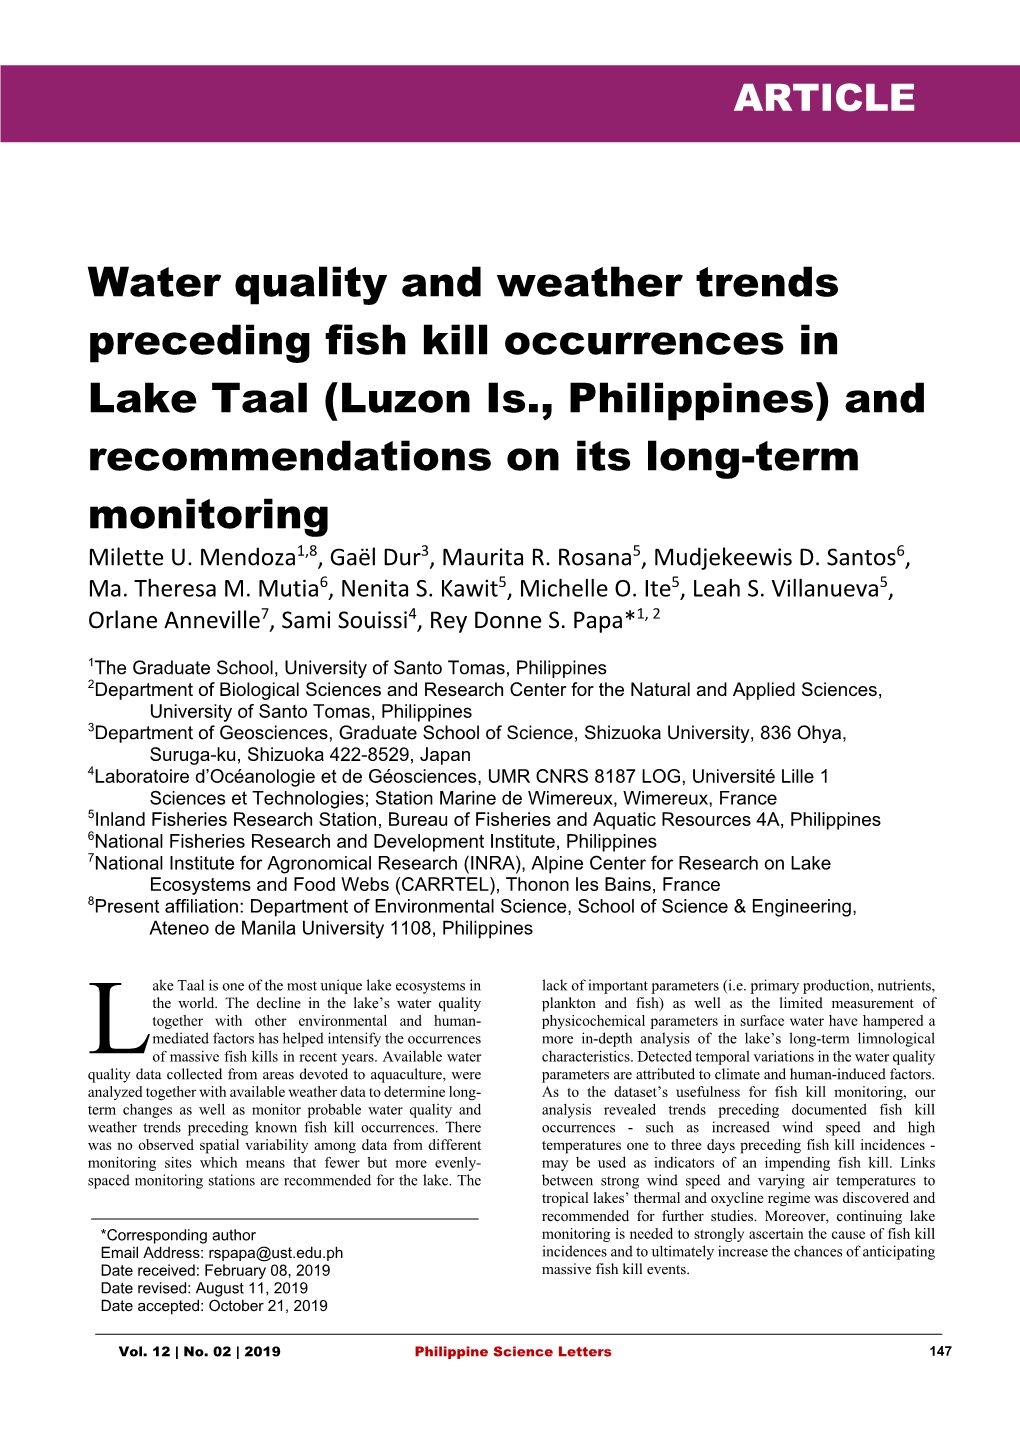 Water Quality and Weather Trends Preceding Fish Kill Occurrences in Lake Taal (Luzon Is., Philippines) and Recommendations on Its Long-Term Monitoring Milette U